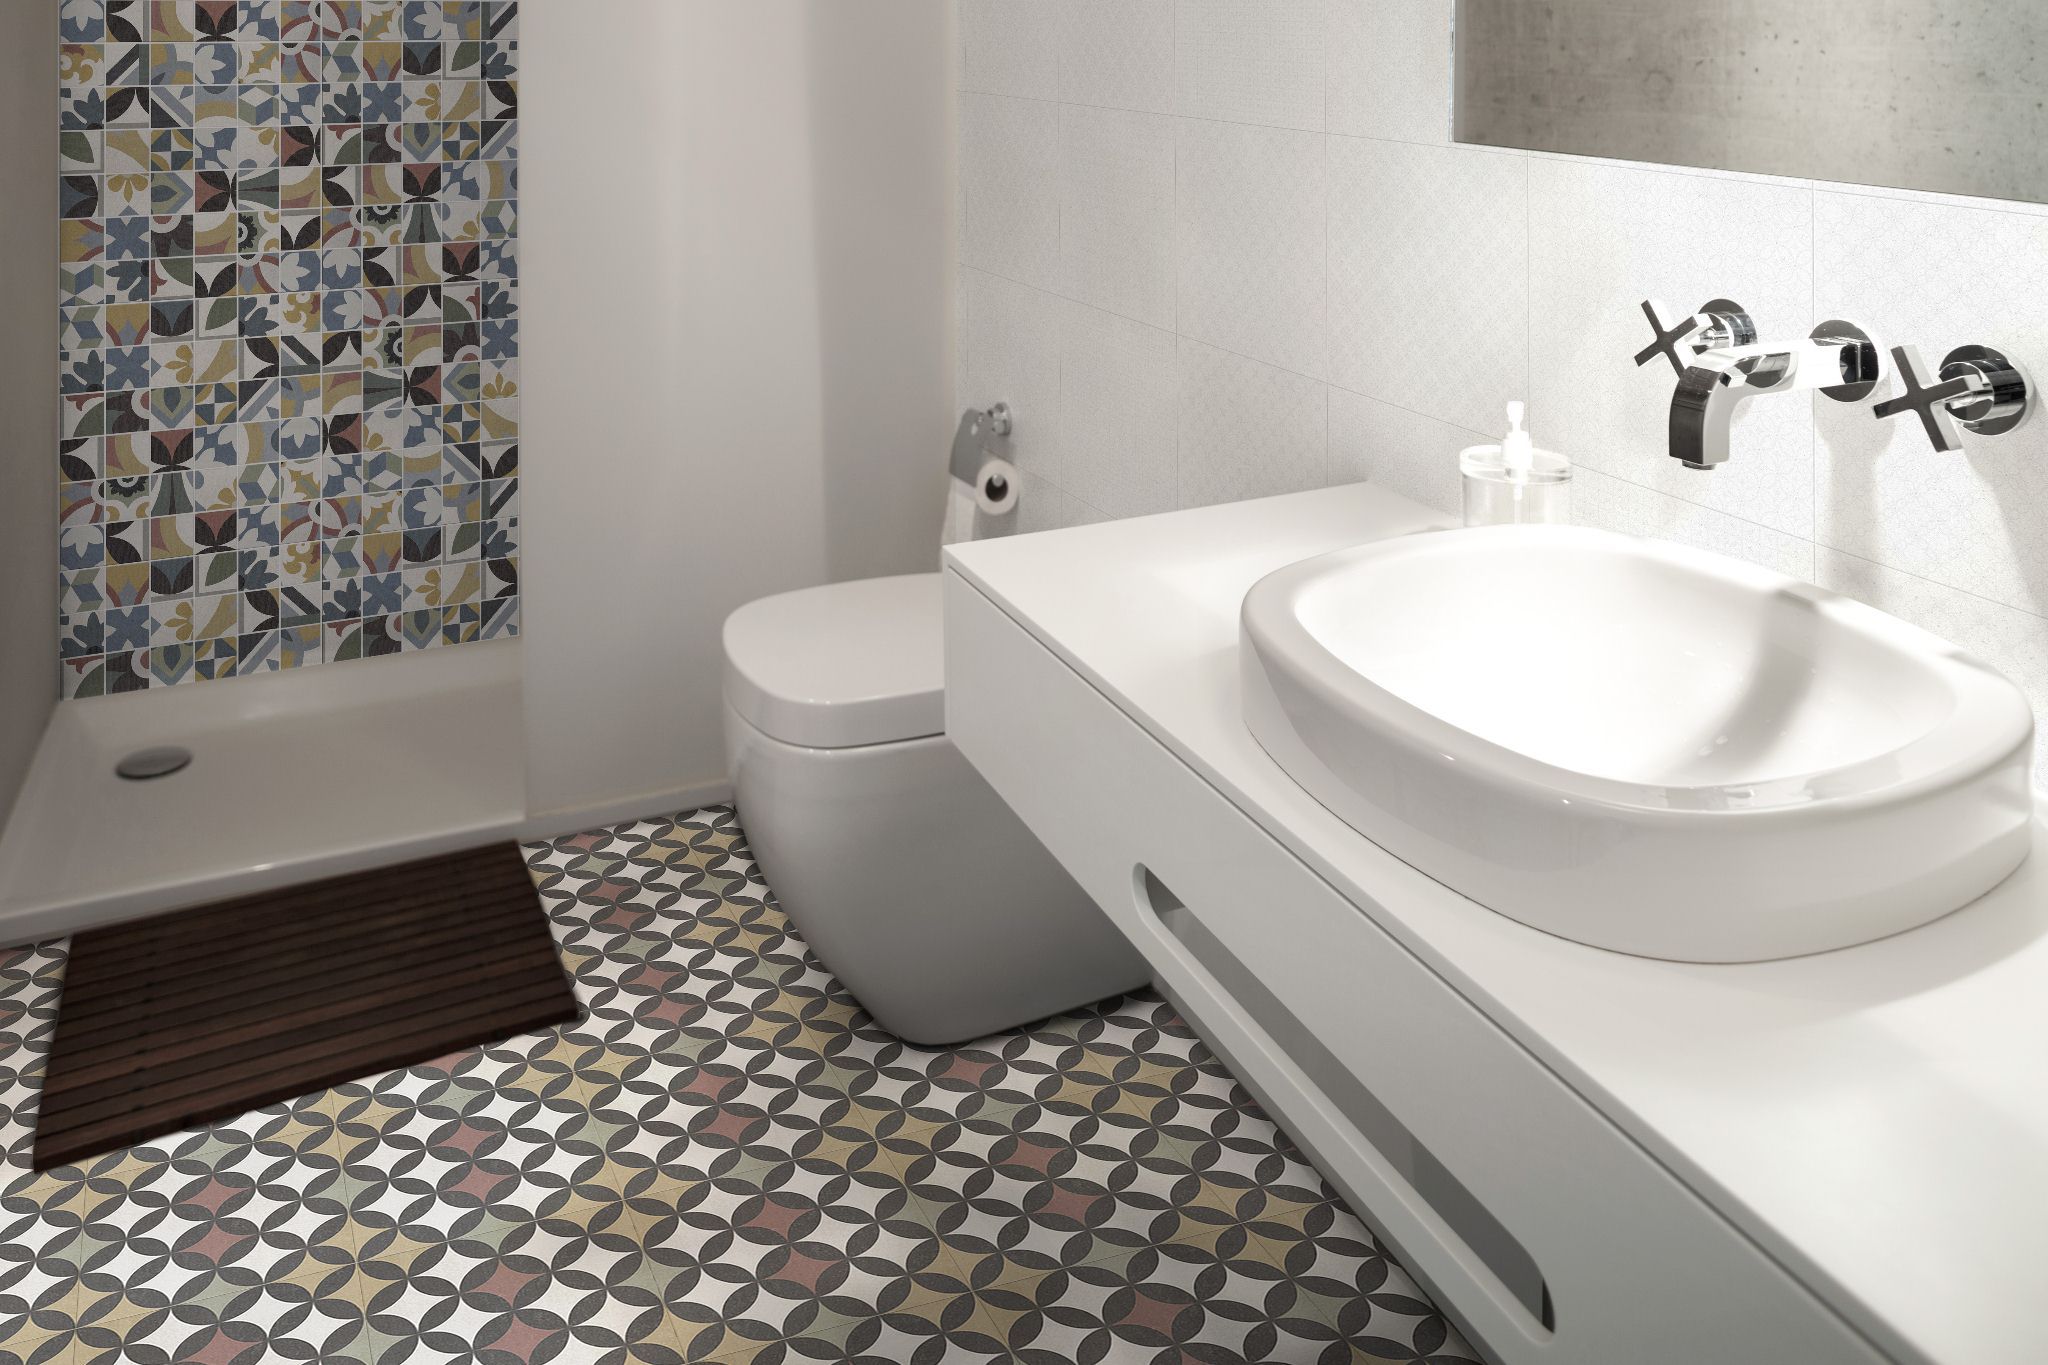 Santiago | Stones & More | Finest selection of Mosaics, Glass, Tile and Stone